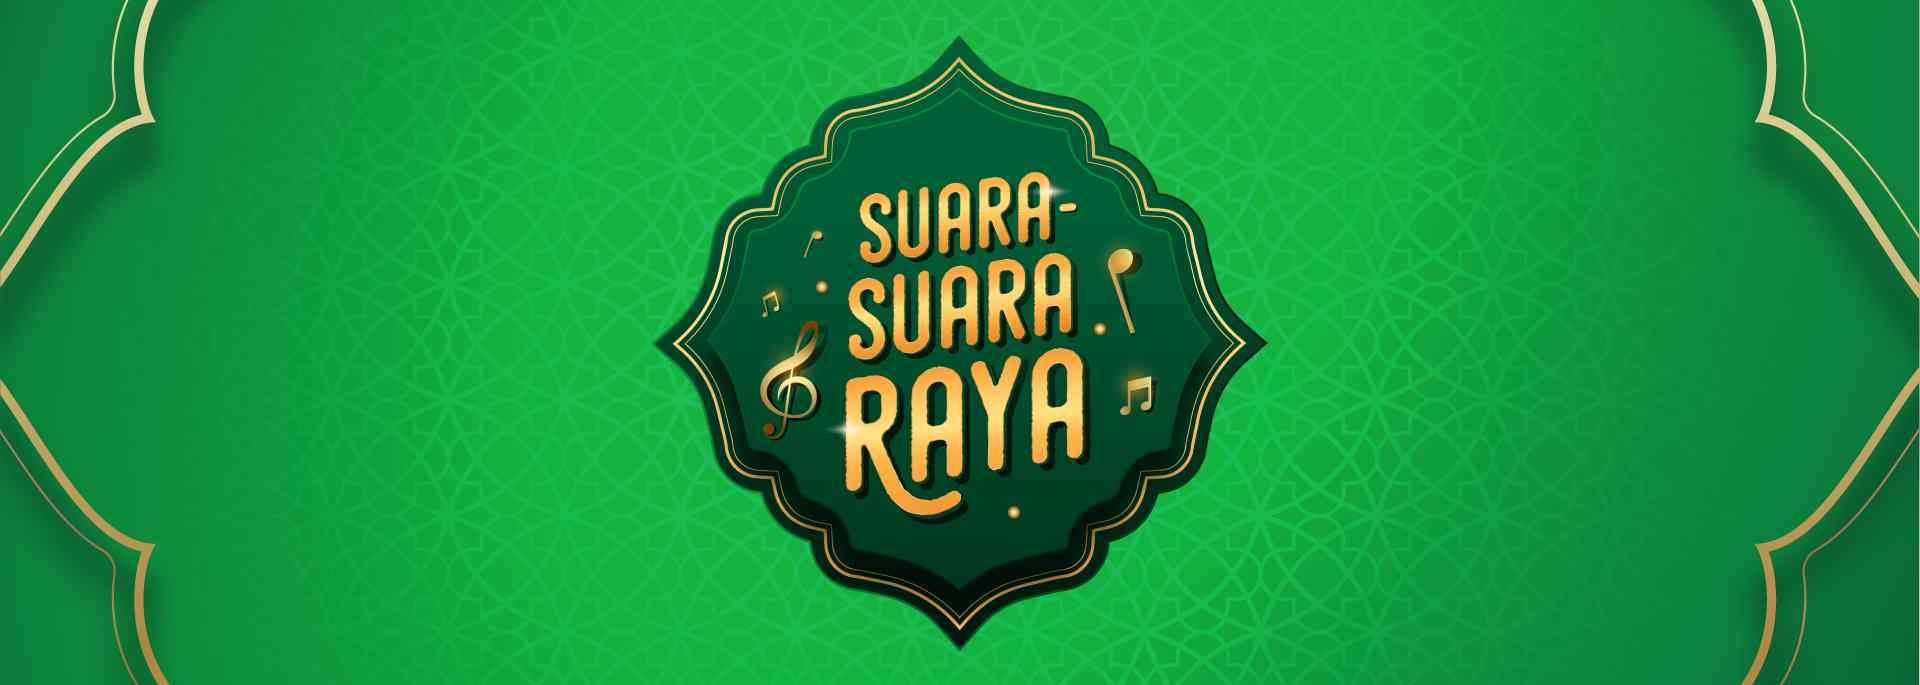 Raya 2021: TIKTOK Dance Challenge Contest Terms And Conditions